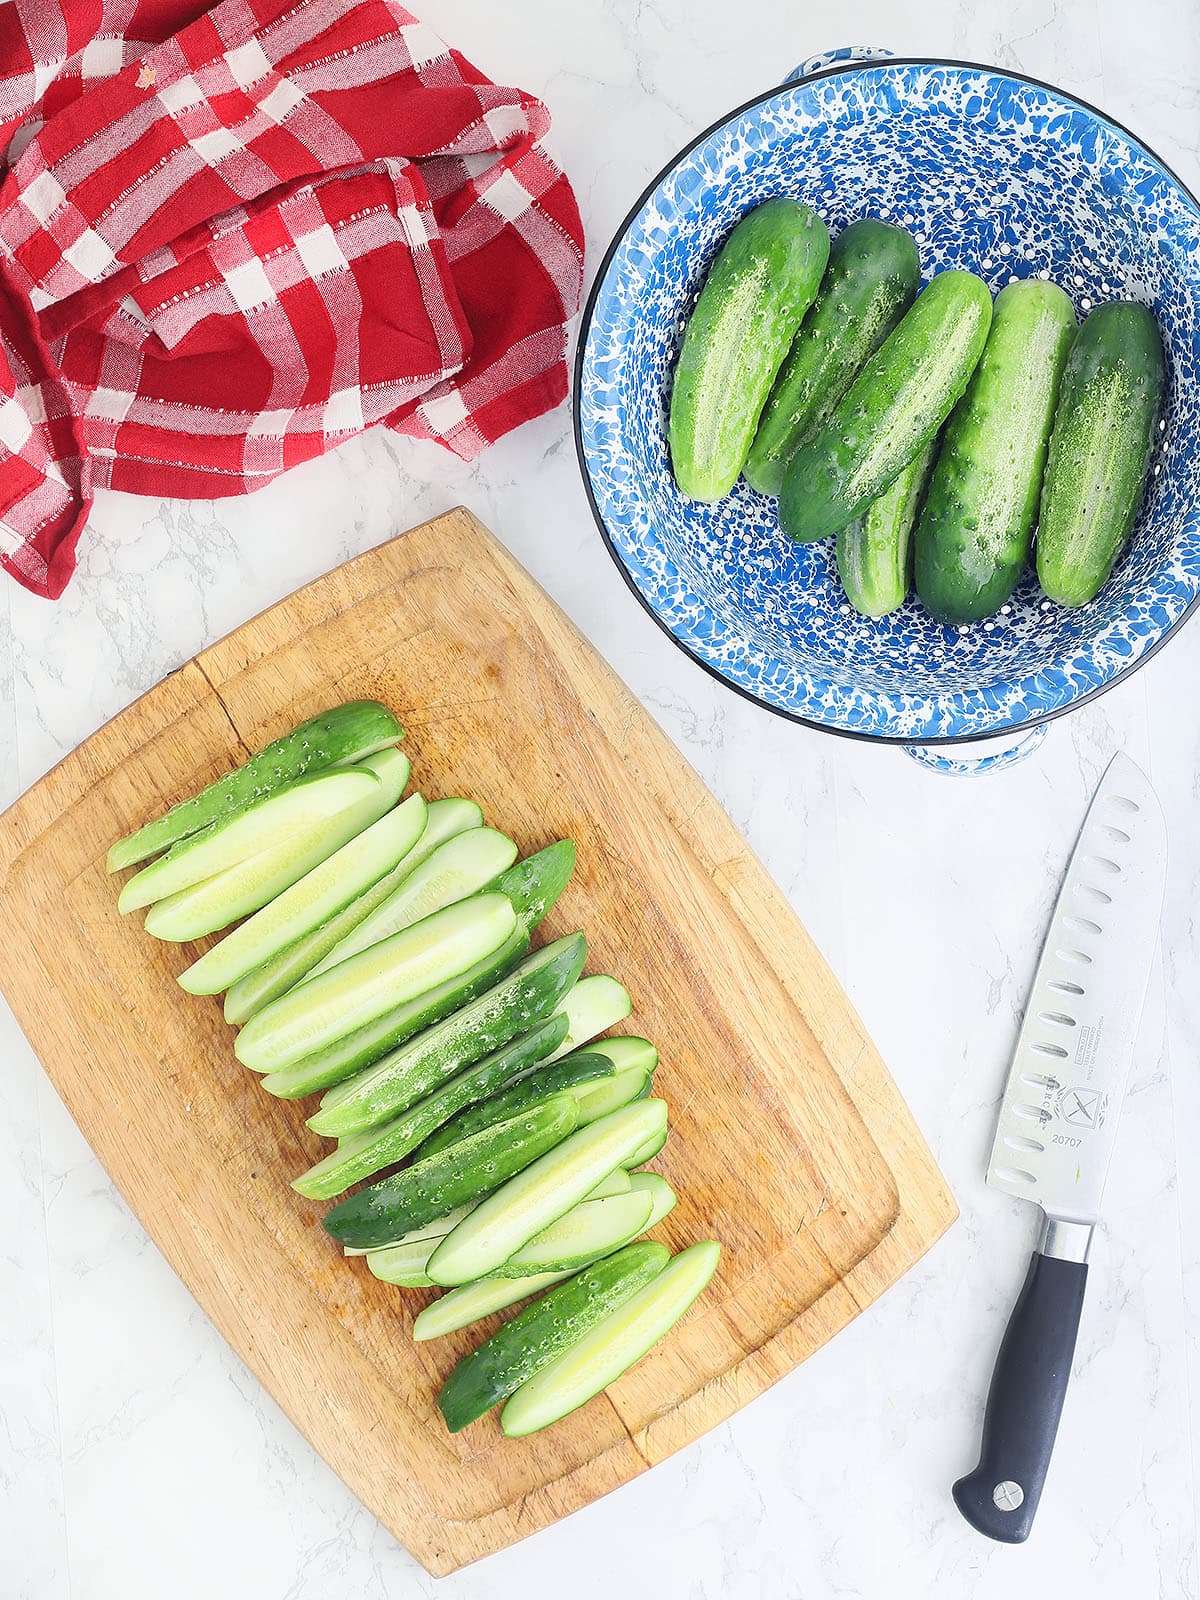 wooden cutting board with dill pickle spears, knife and blue colander with whole cucumbers on the side